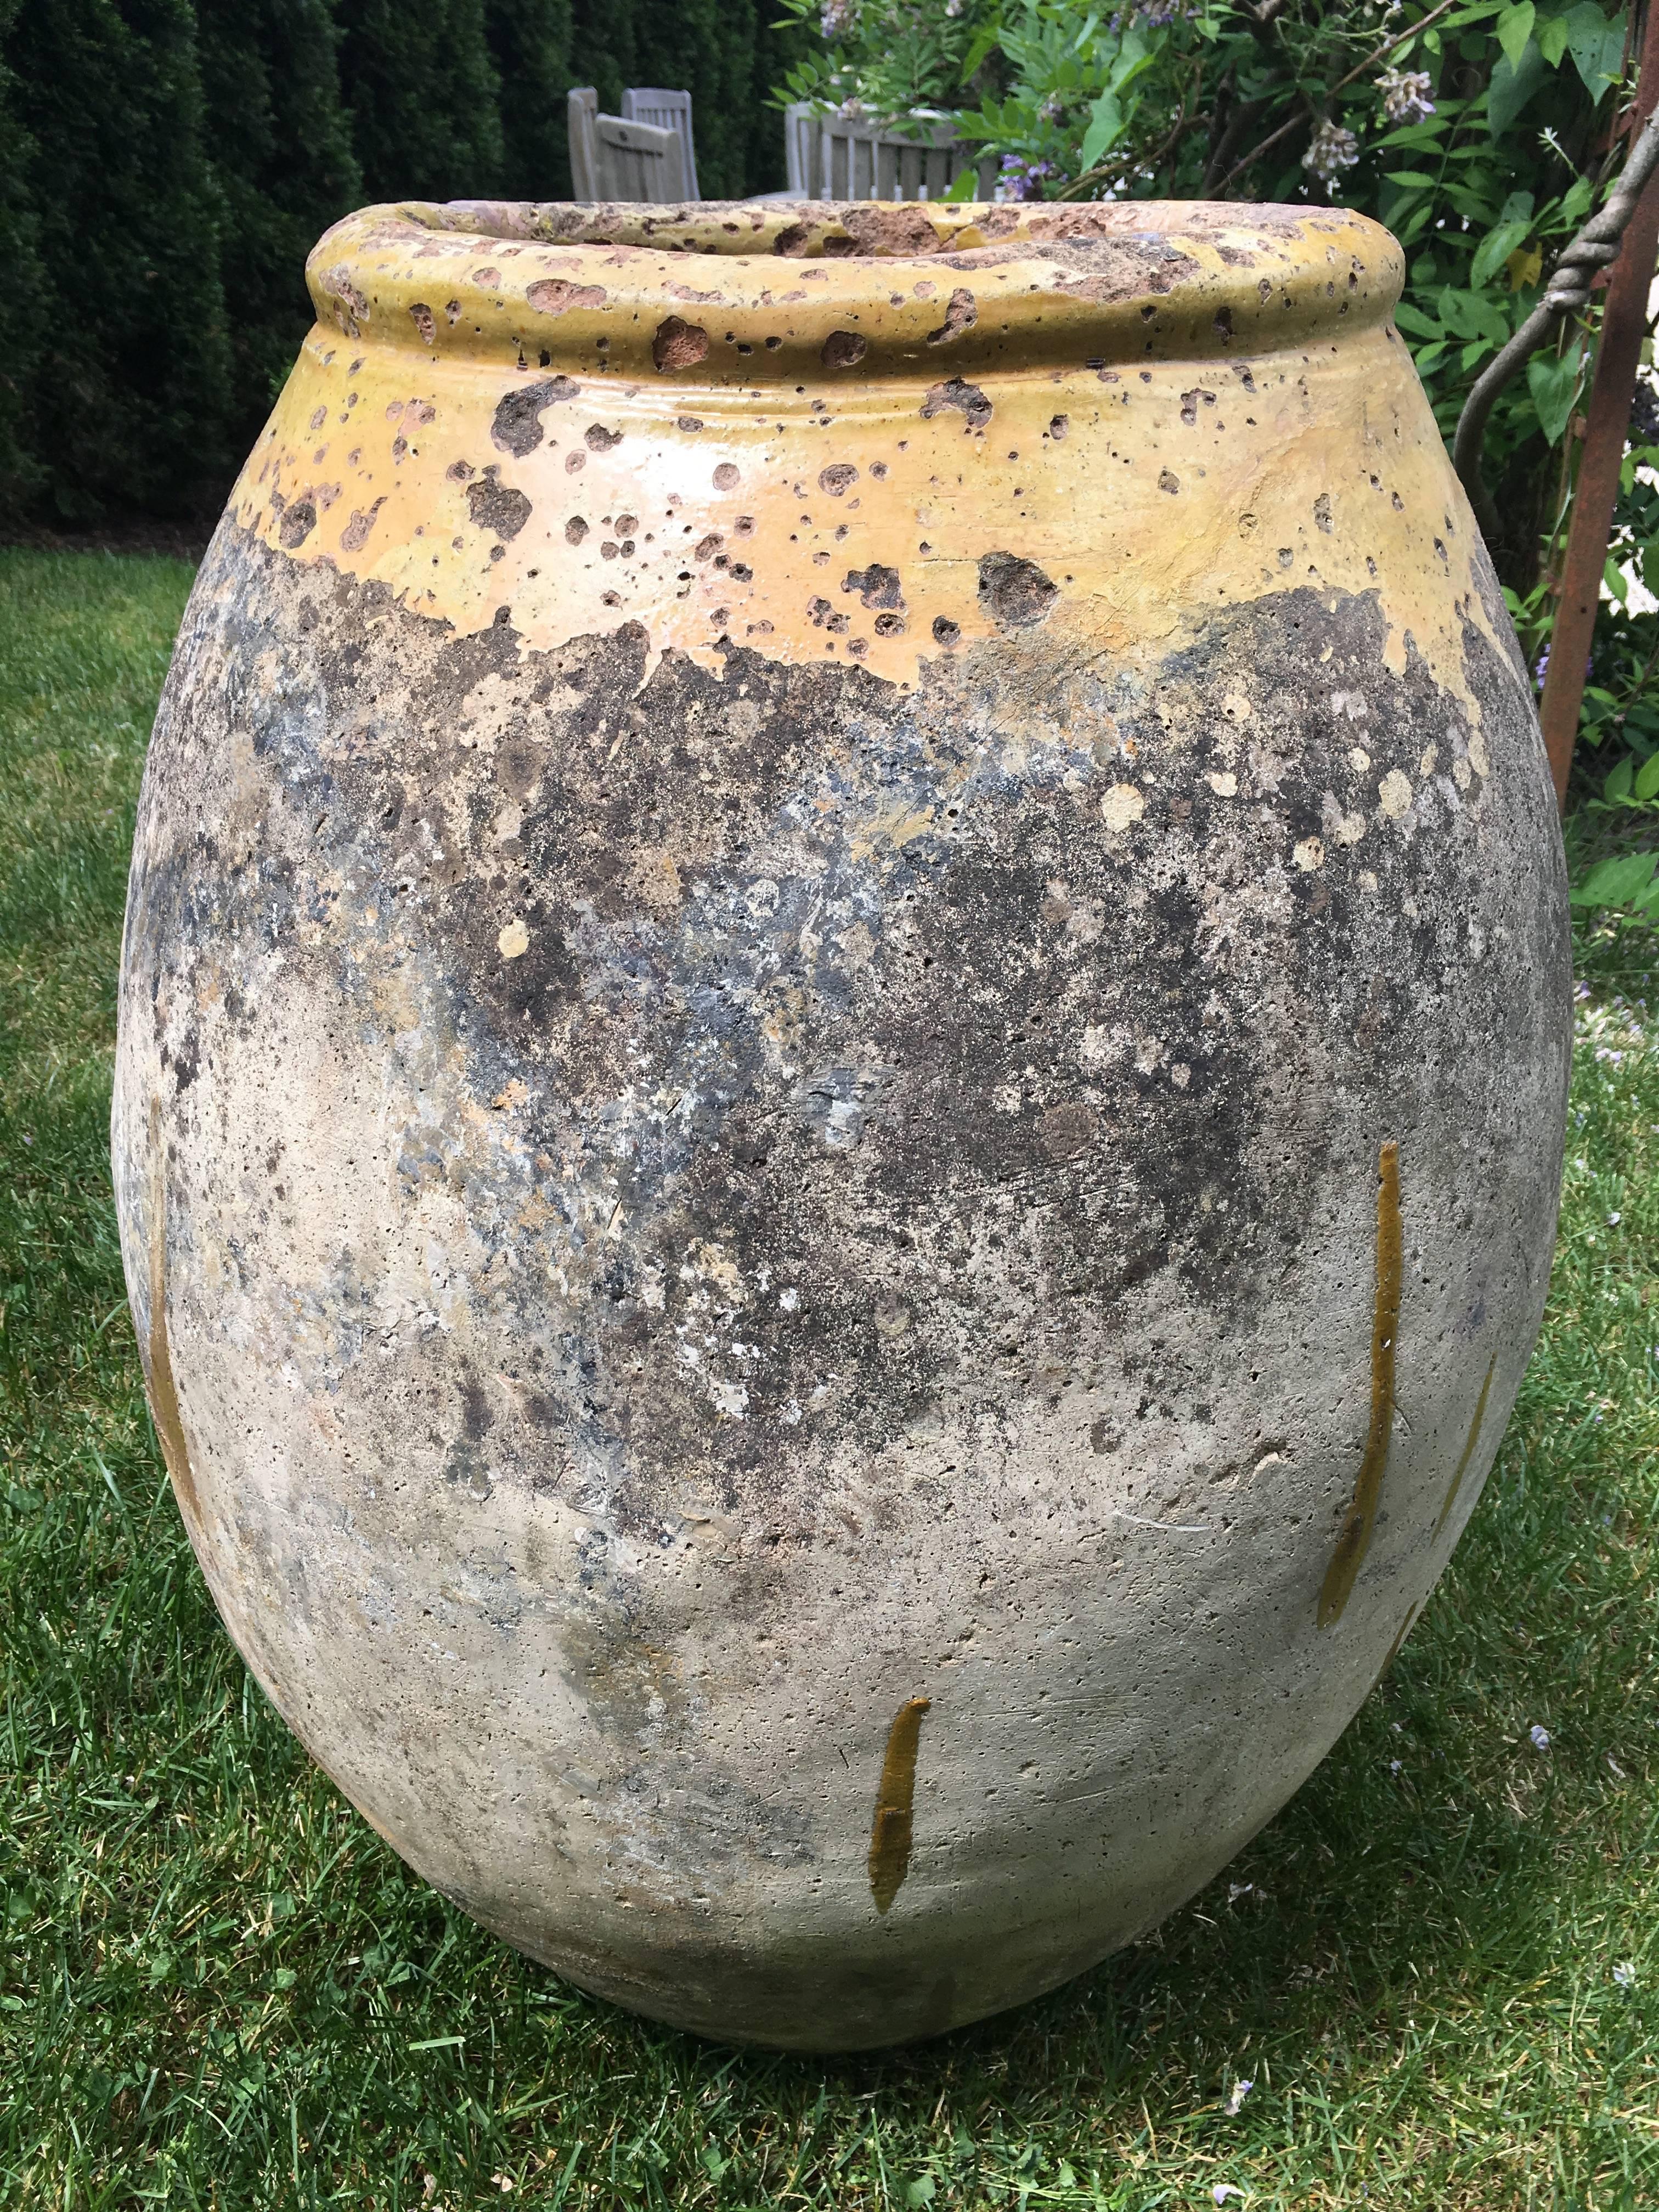 This is a wonderful example of 17th century Biot jars or pots, which hail from the town of Biot in Provence. These vessels, which are glazed on the interior and exterior rim, were used to hold oil and this particular one is marked on the neck with